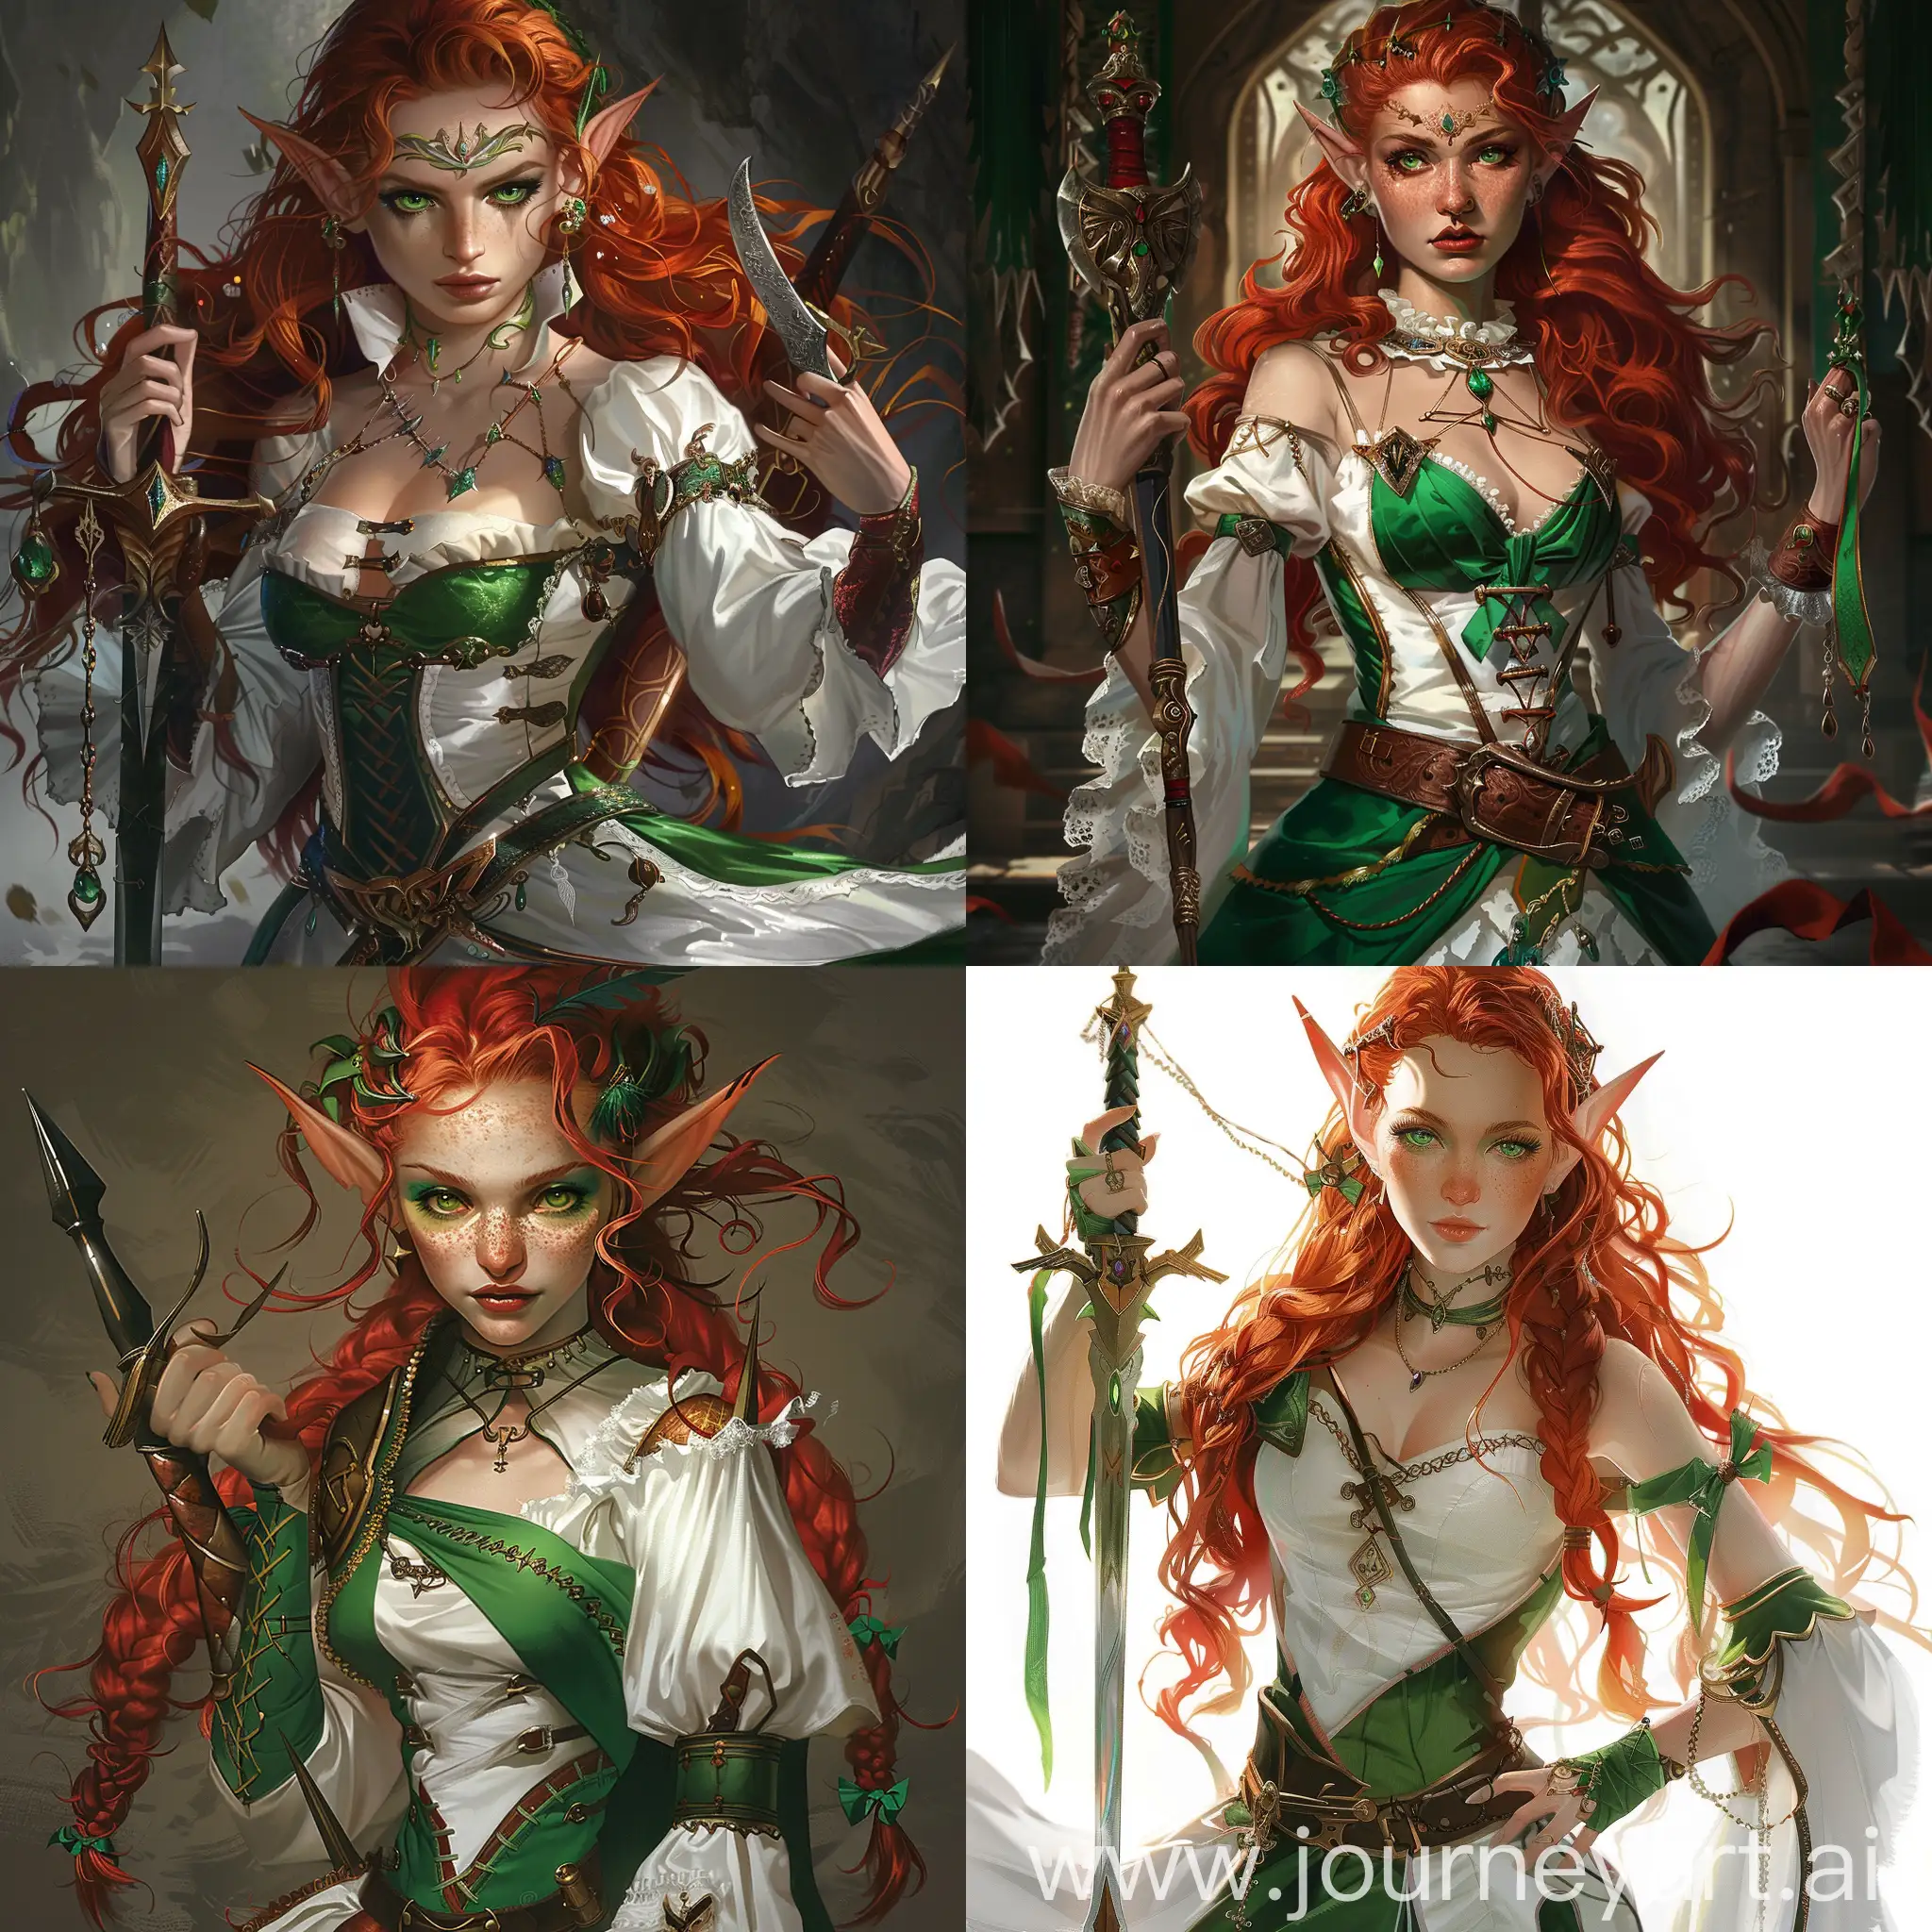 Enchanting-RedHaired-Elf-Wielding-a-Dagger-in-a-Whimsical-Forest